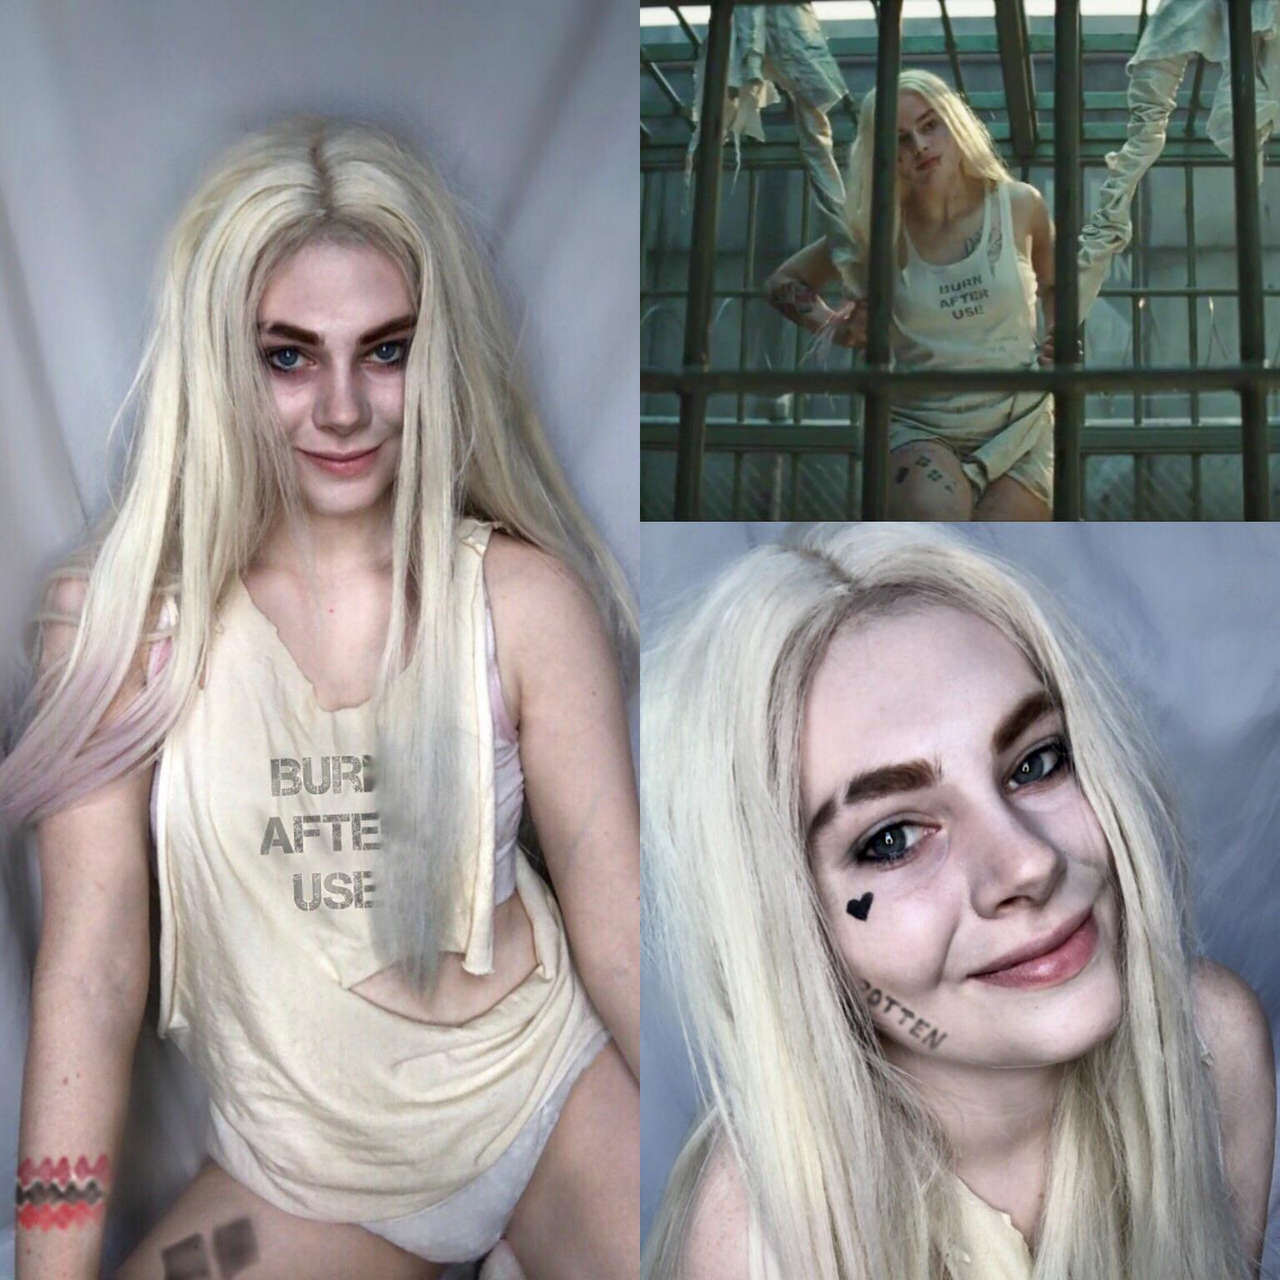 Stvrwar As Harley Quin